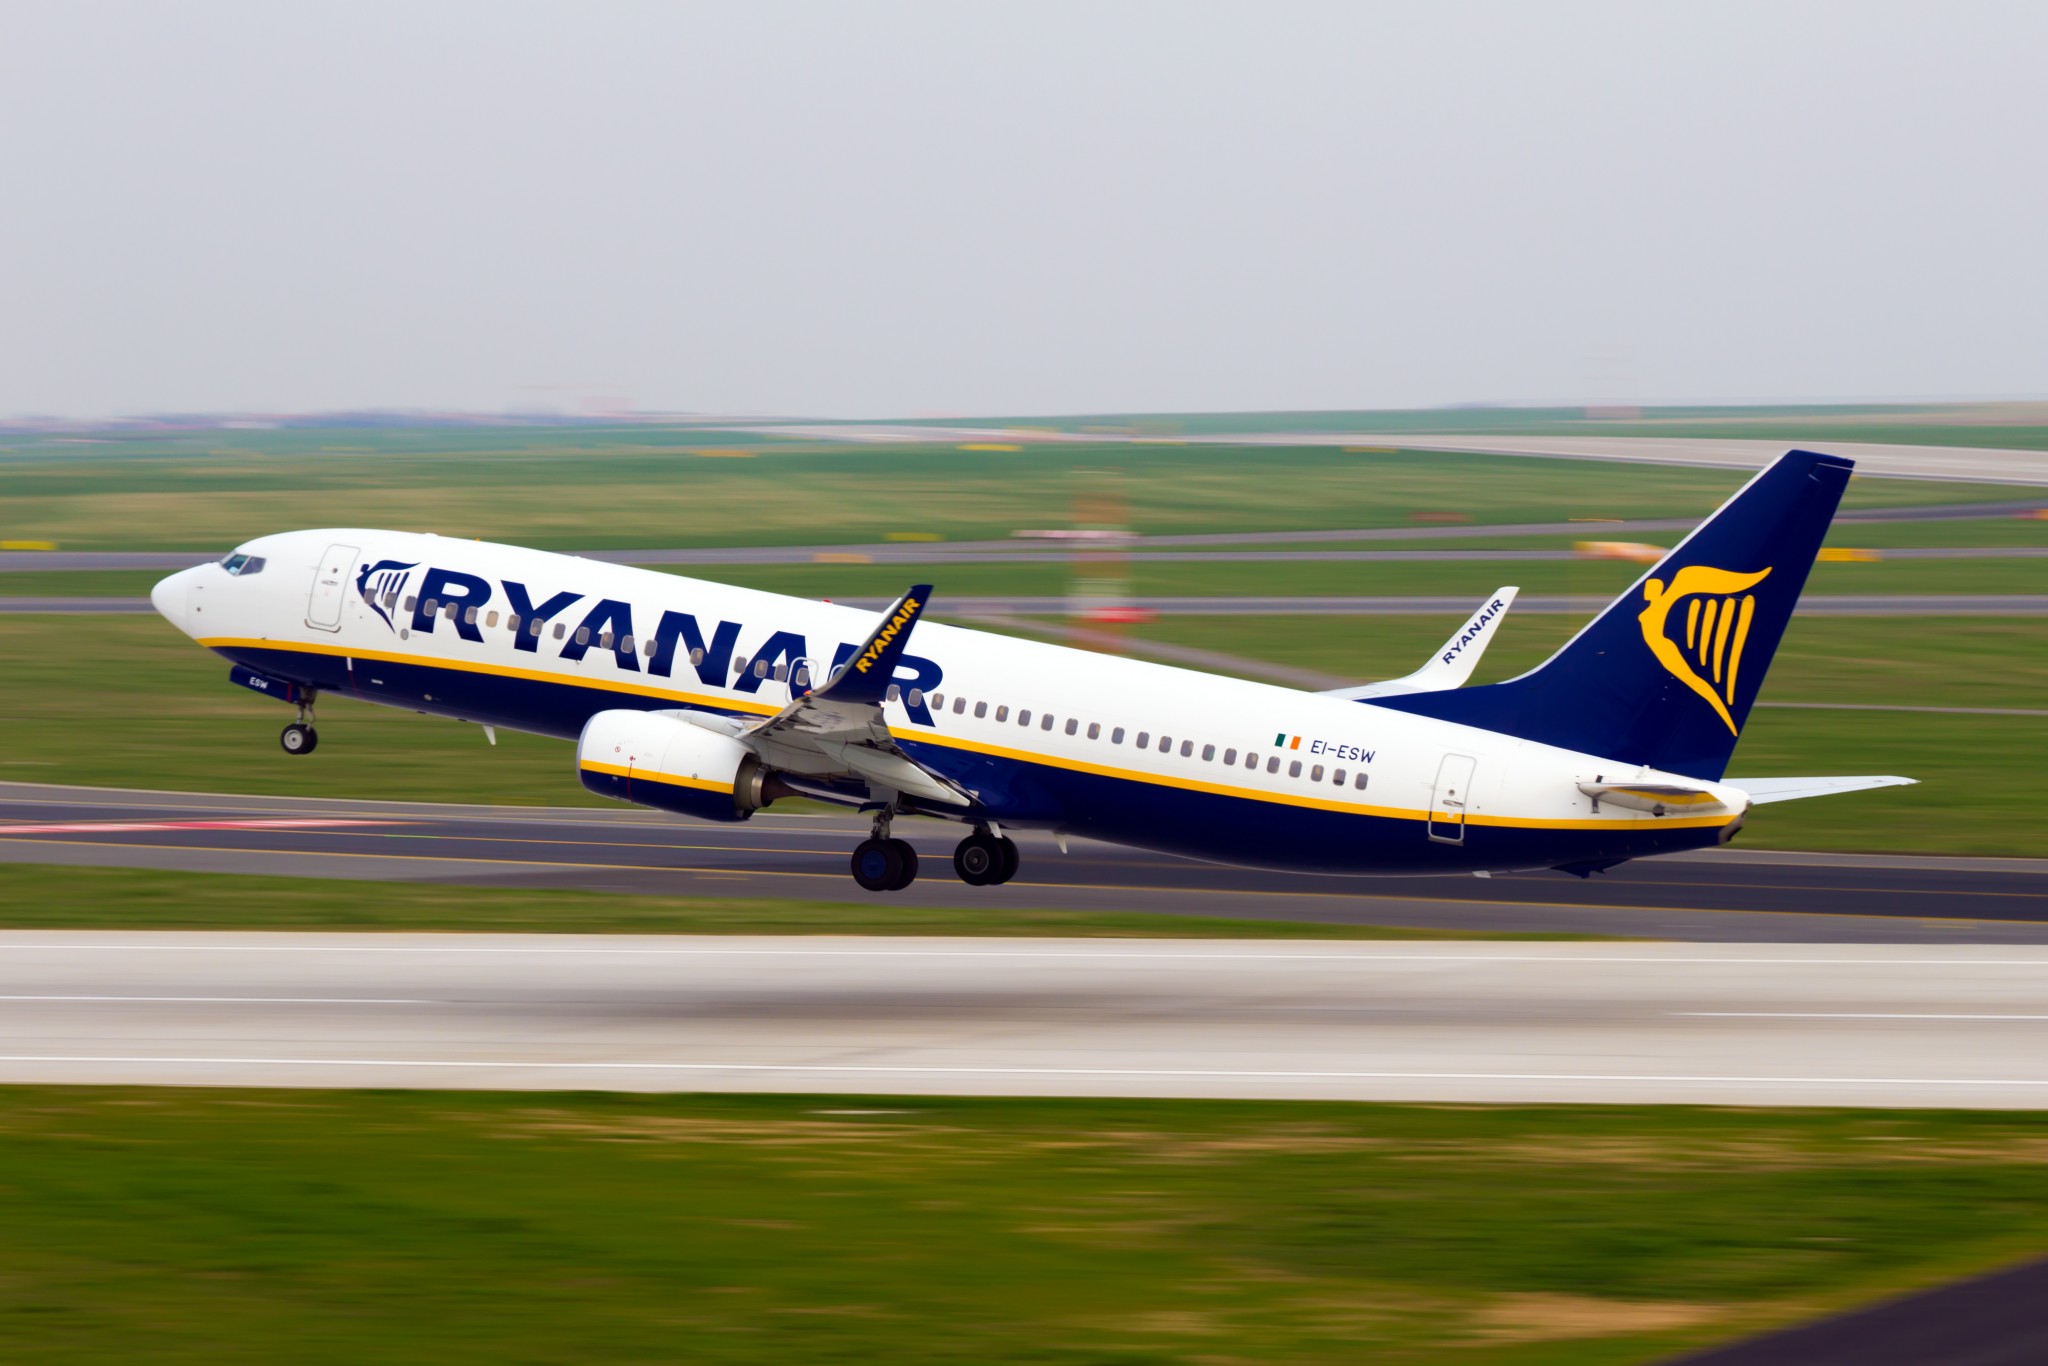 Ryanair blasts rivals rivals“unlawful” state aid as it falls to Q1 loss